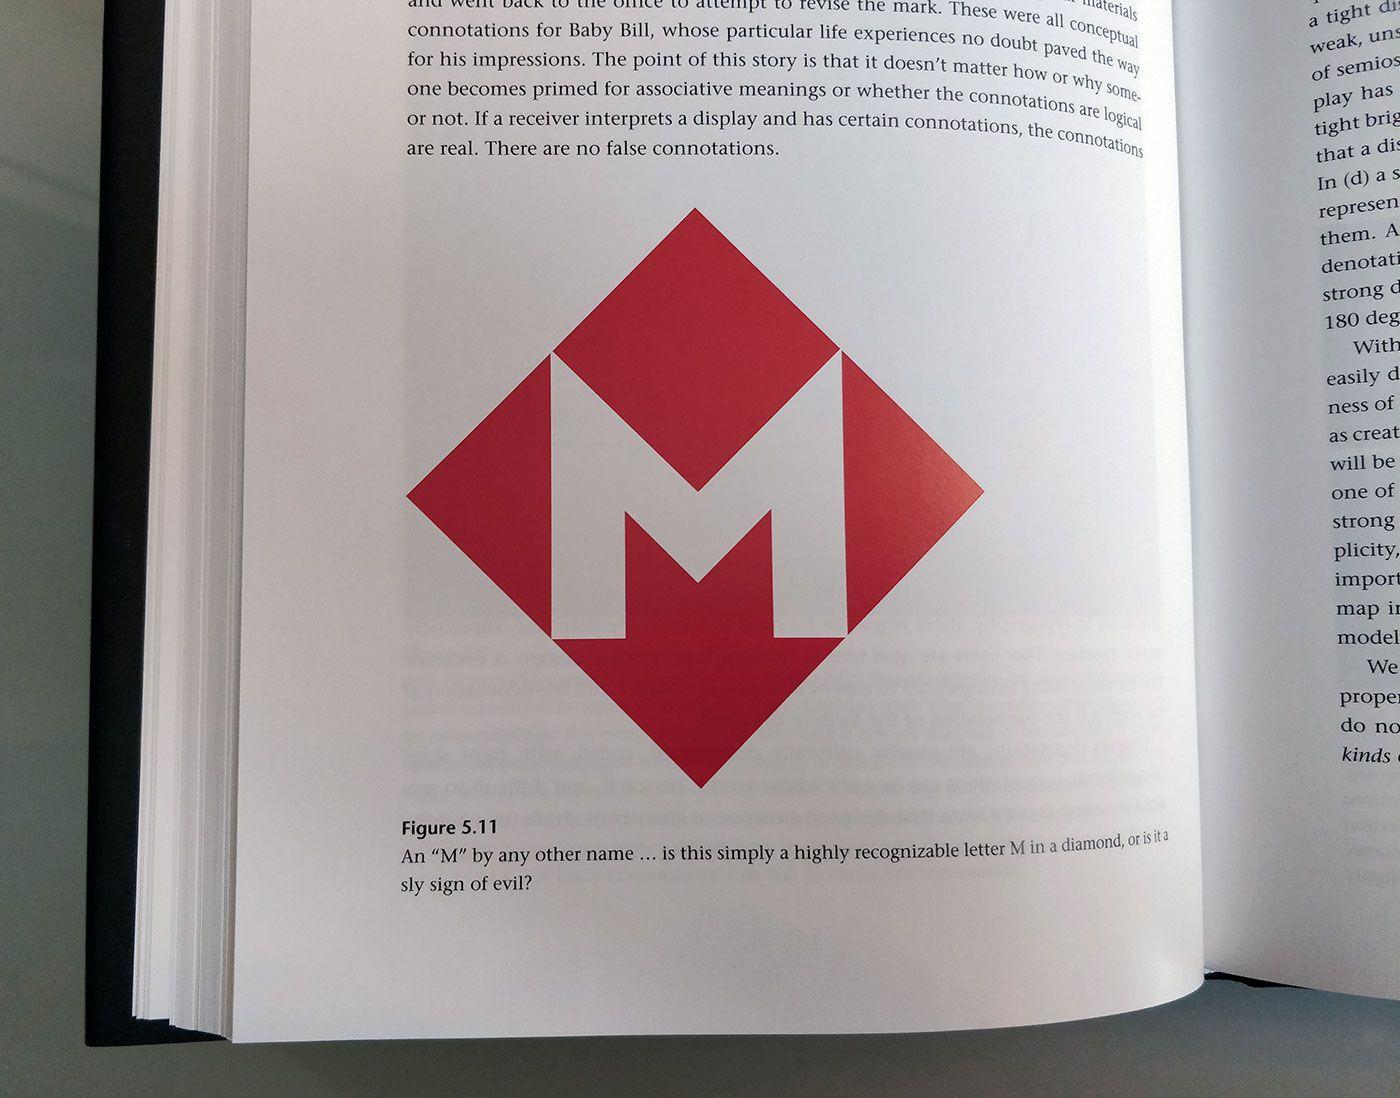 Red and White Diamond Logo - FireSigns: a semiotic theory for graphic design | Logo Design Love